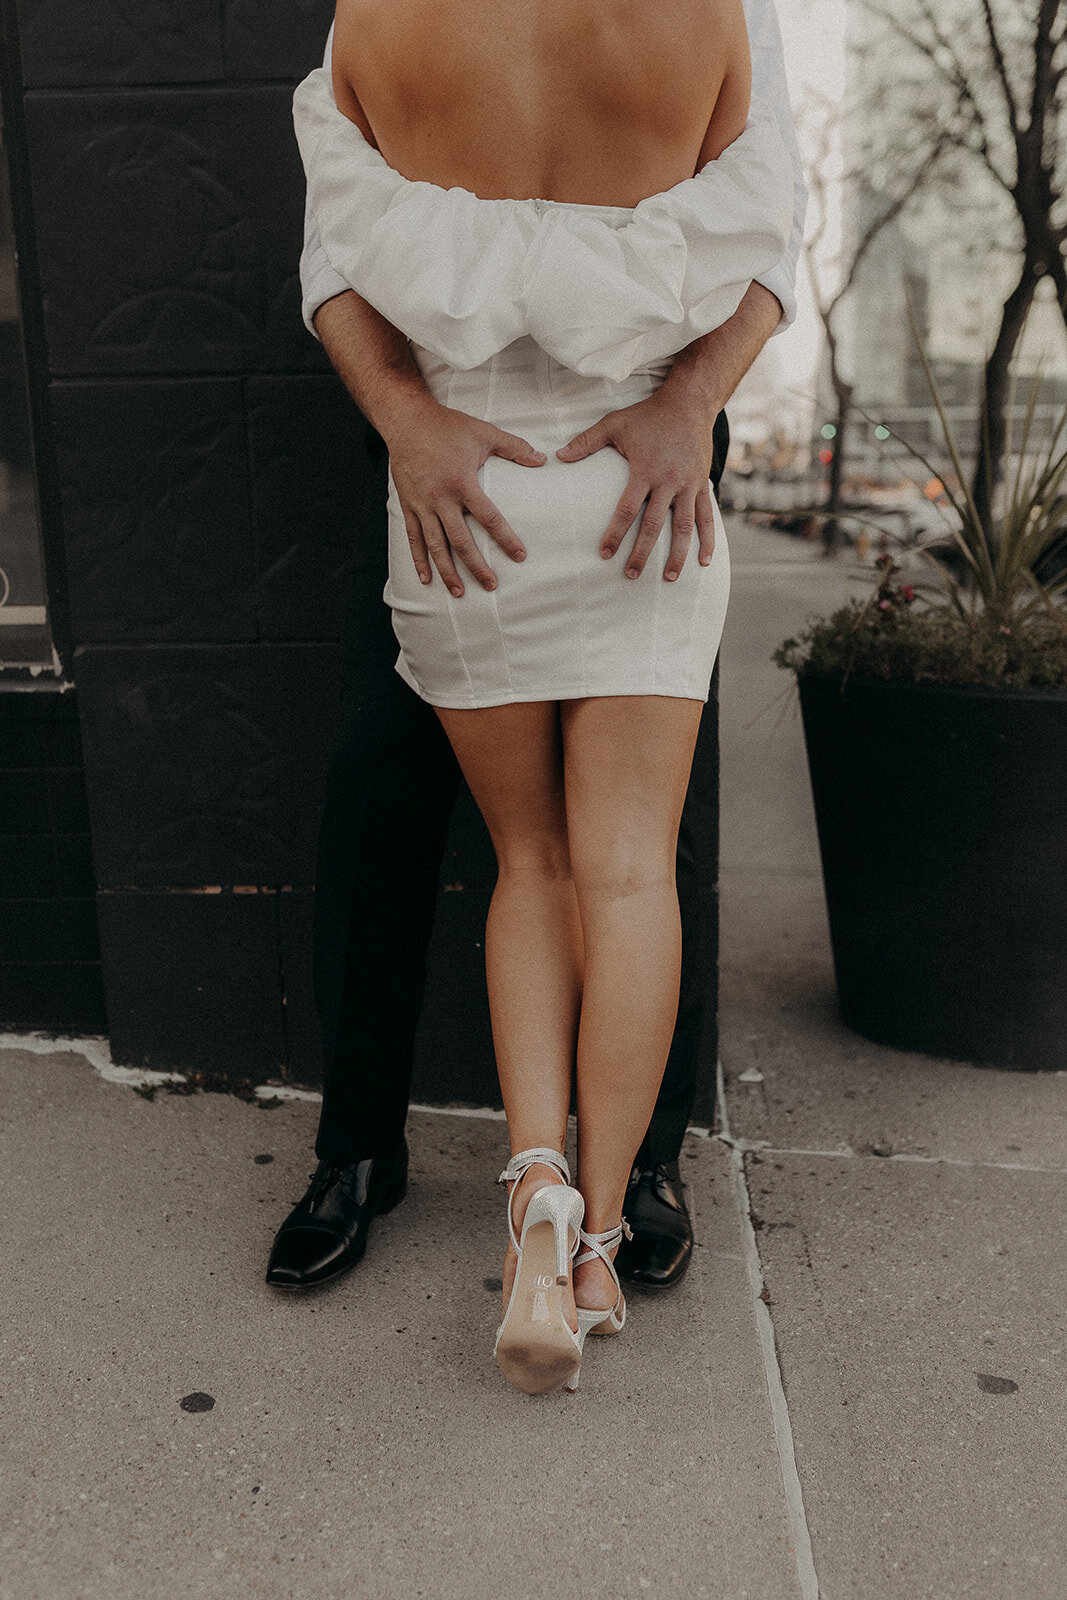 Dancing in the streets of downtown omaha for this editorial style engagement session